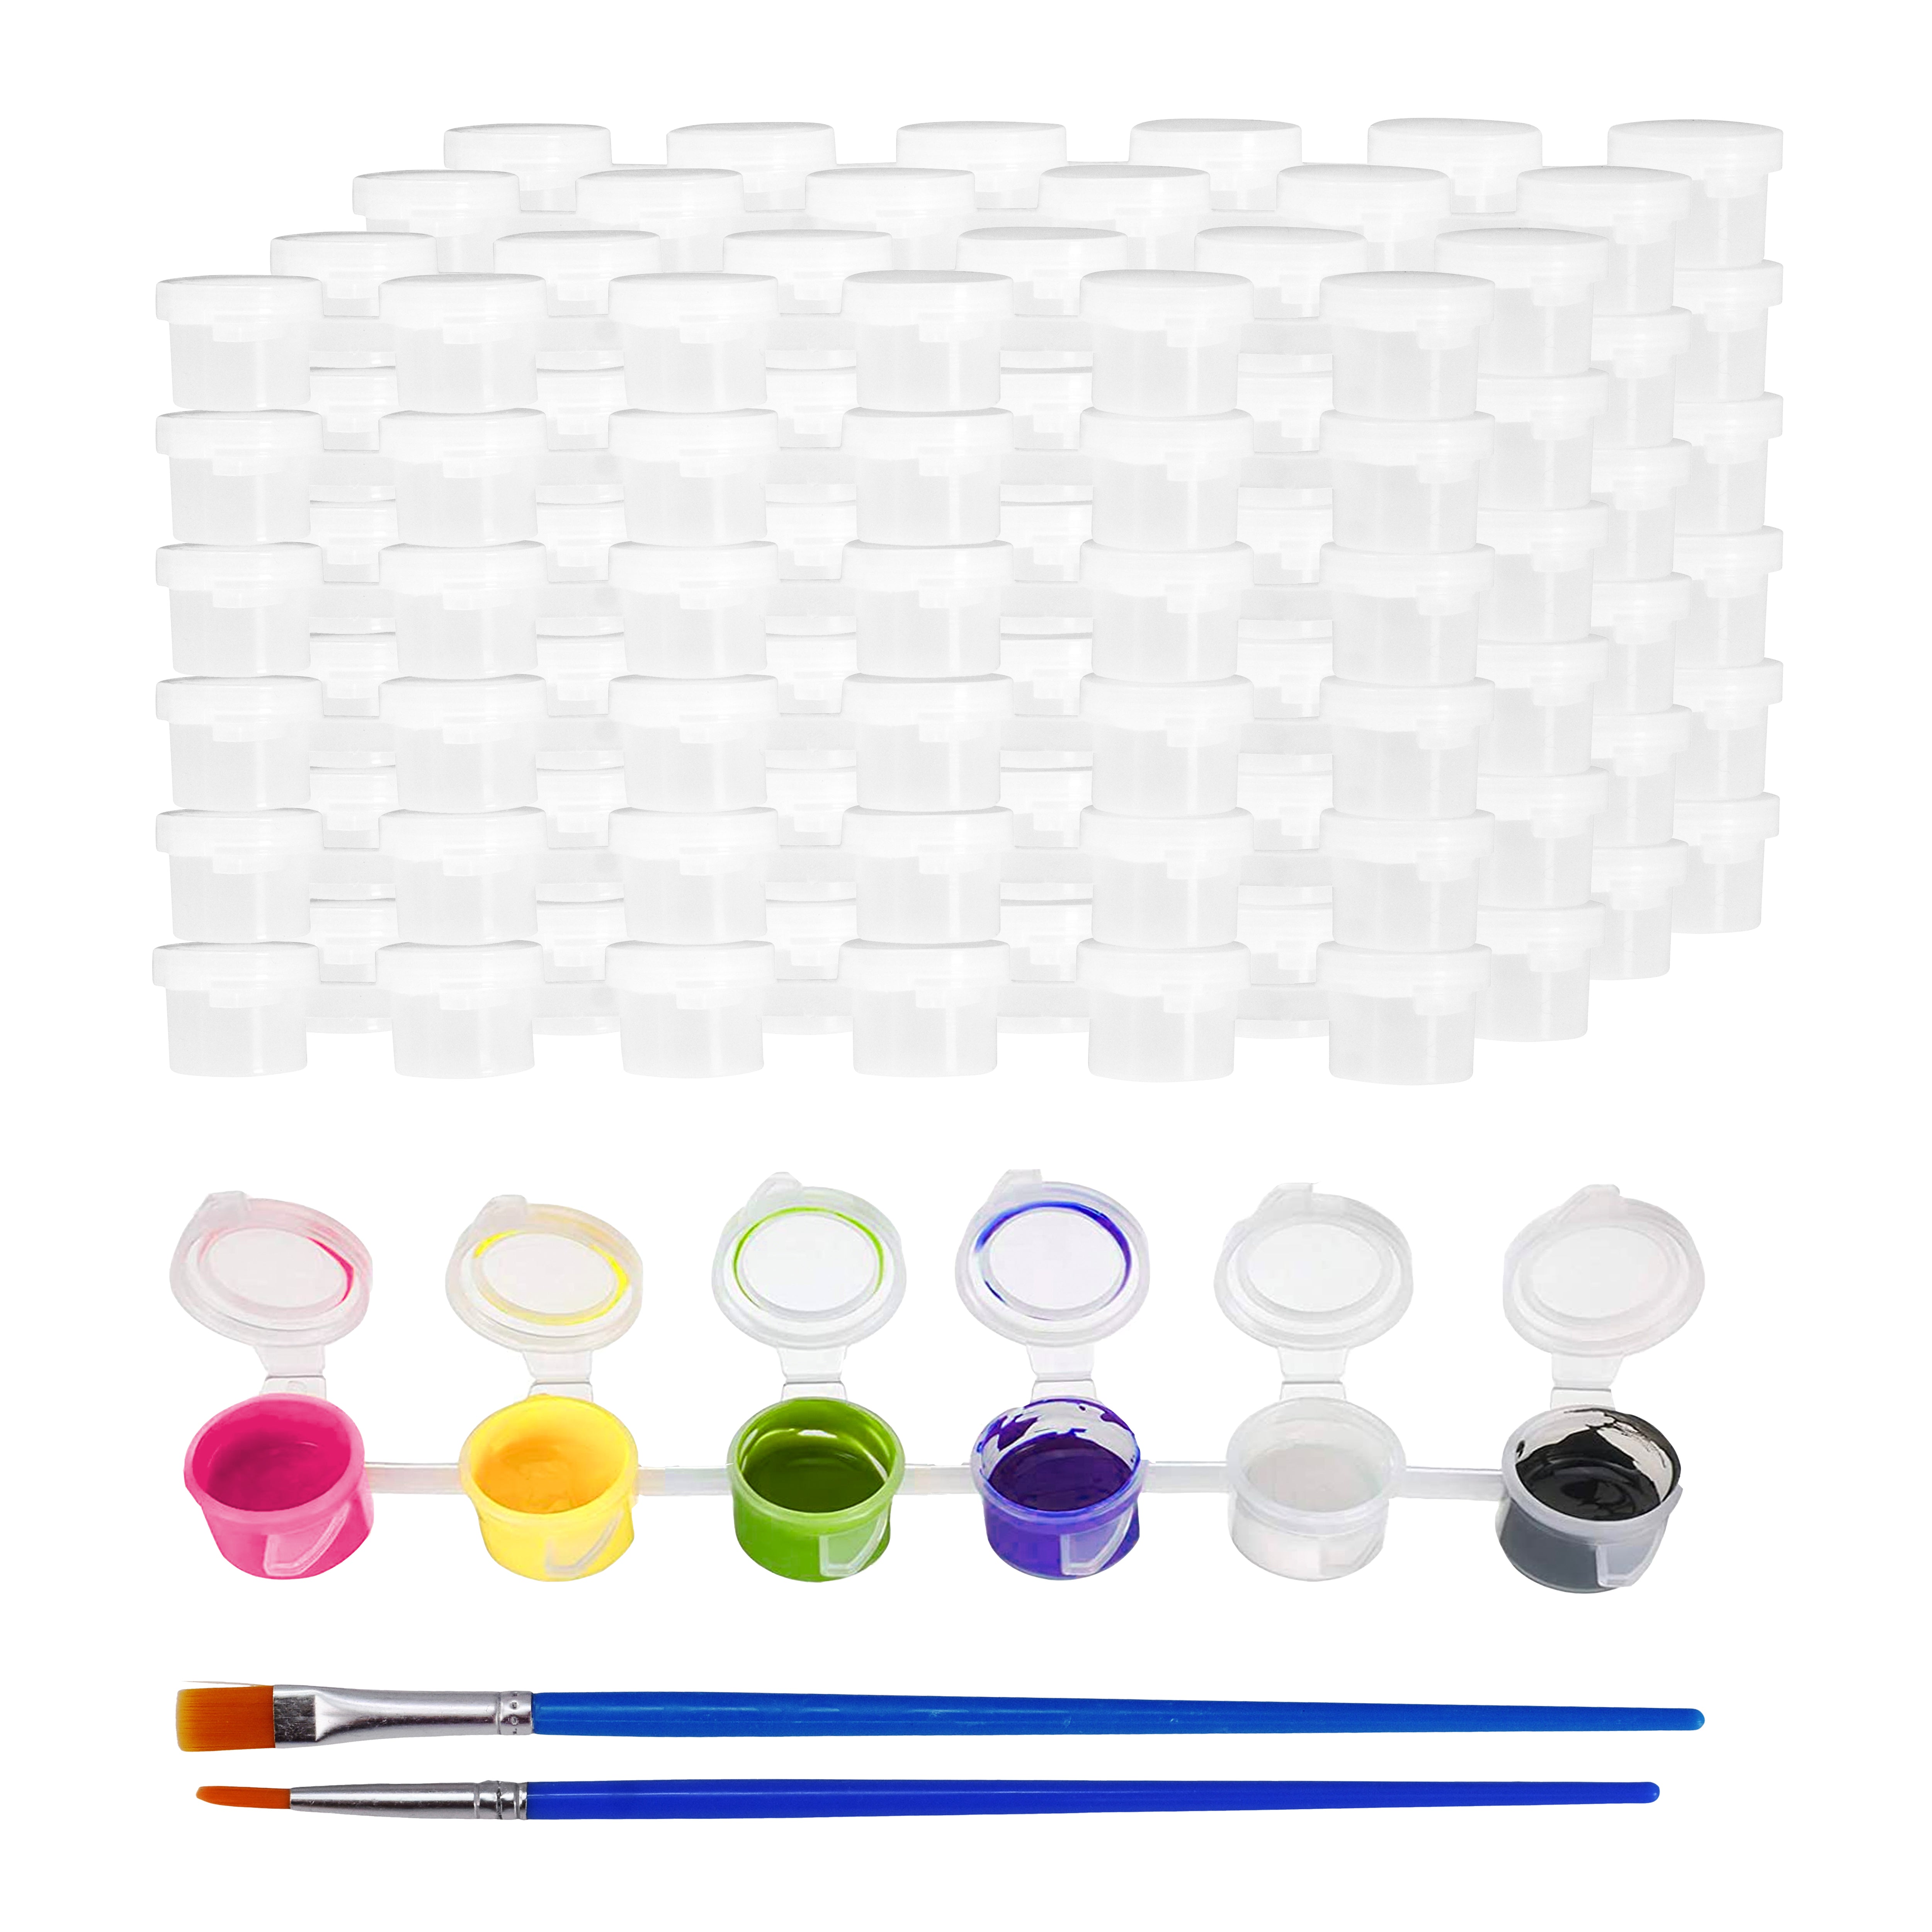 Fengwu 100 Strips 3ml Empty Paint Strips with Lids Mini Plastic Painting Cup Pots Clear Storage Painting Containers for Class